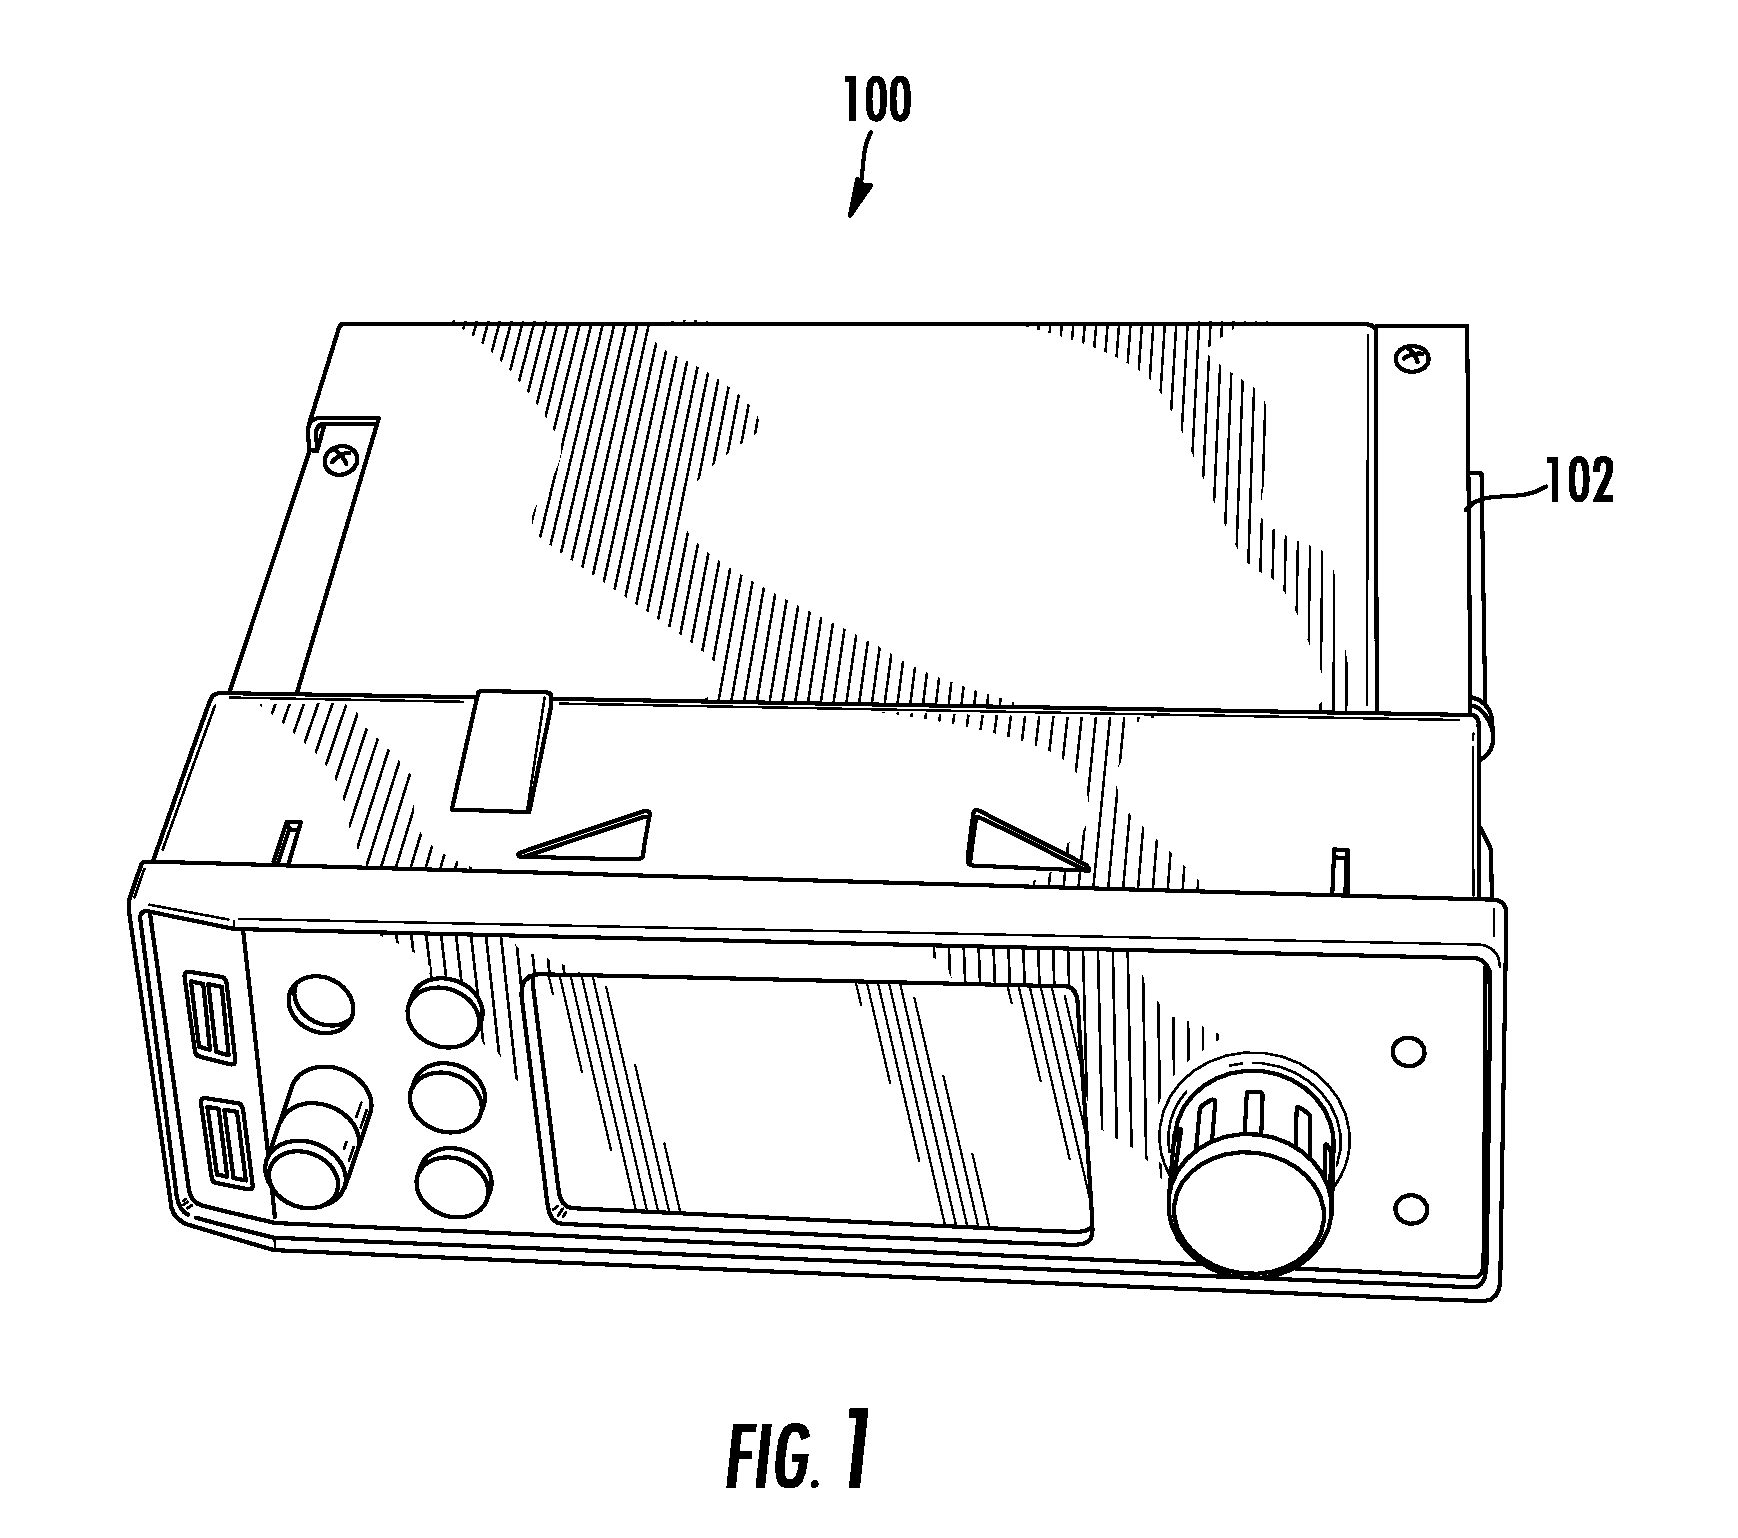 Control unit for off-road vehicles including housing configured to fit within pre-existing cavity of off-road-vehicle cab